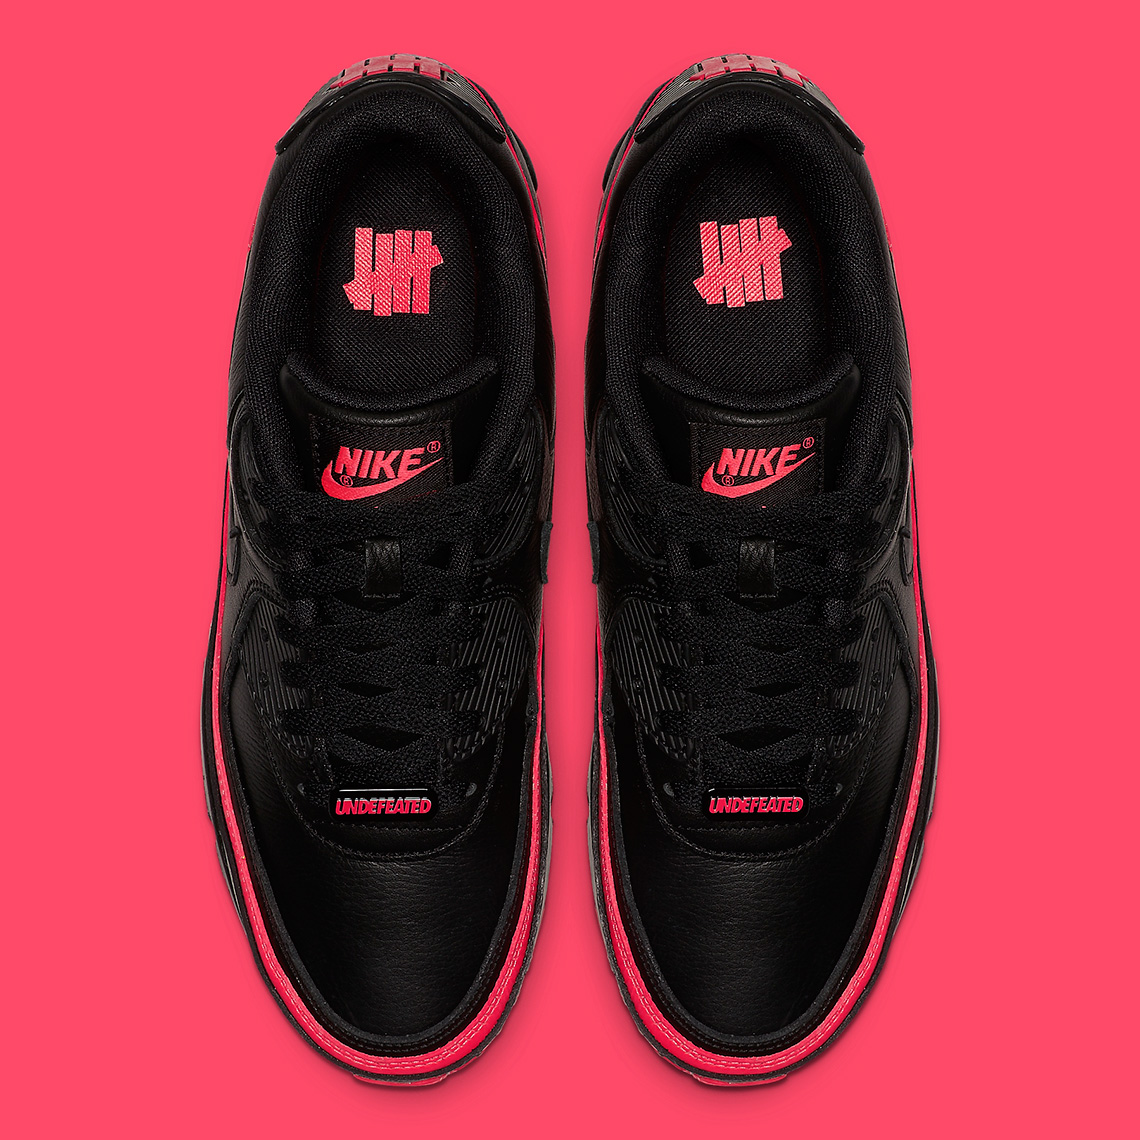 UNDEFEATED Nike Air Max 90 Release Date Info | SneakerNews.com